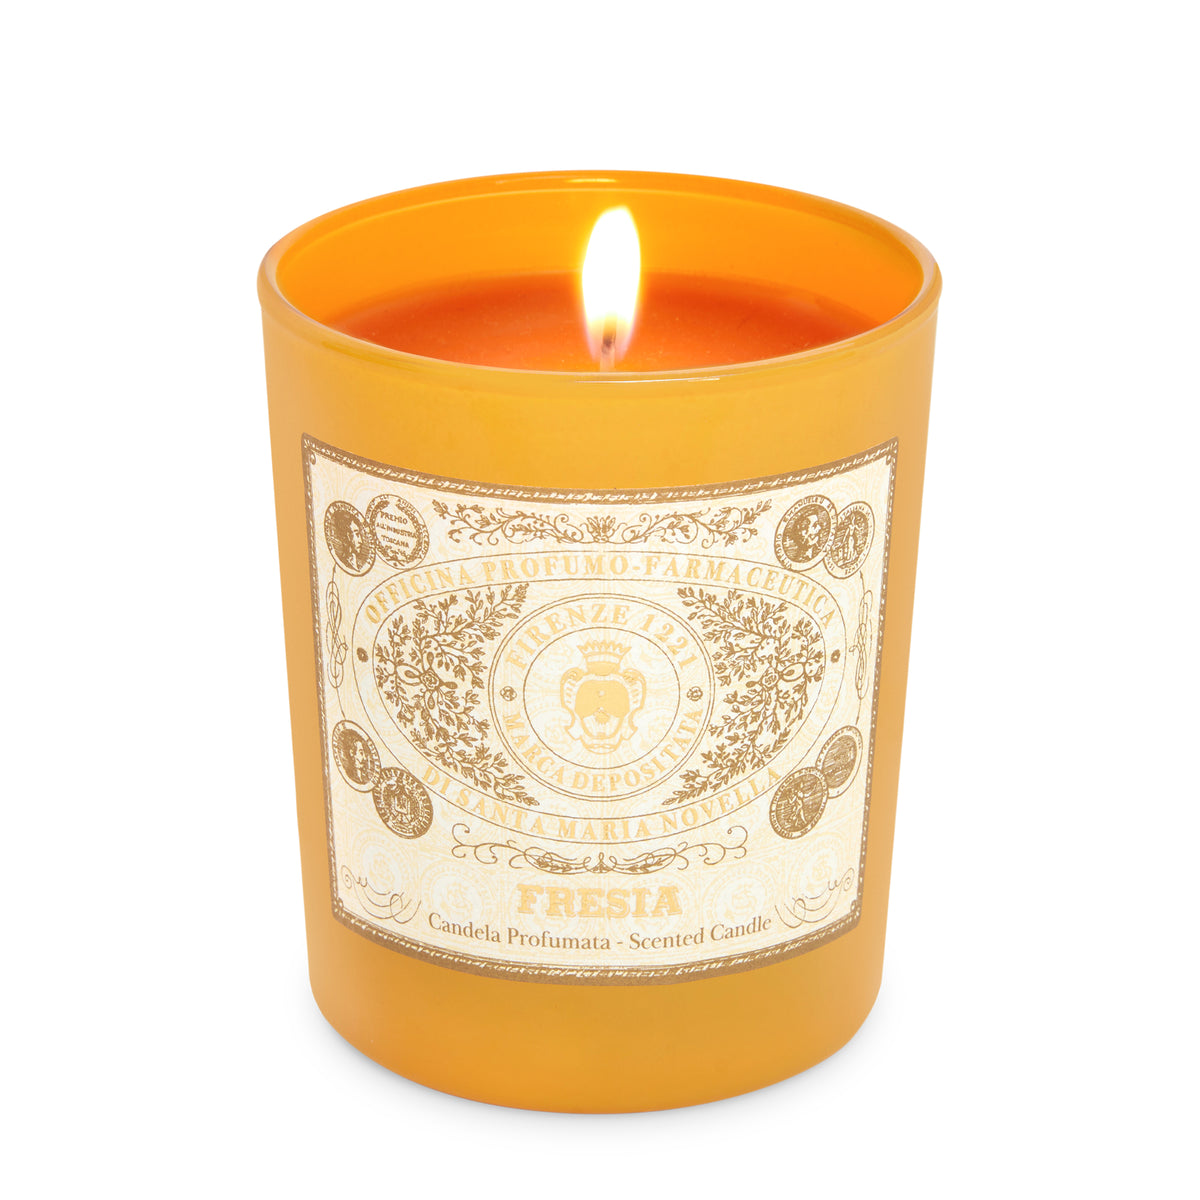 Primary Image of Fresia Scented Candle